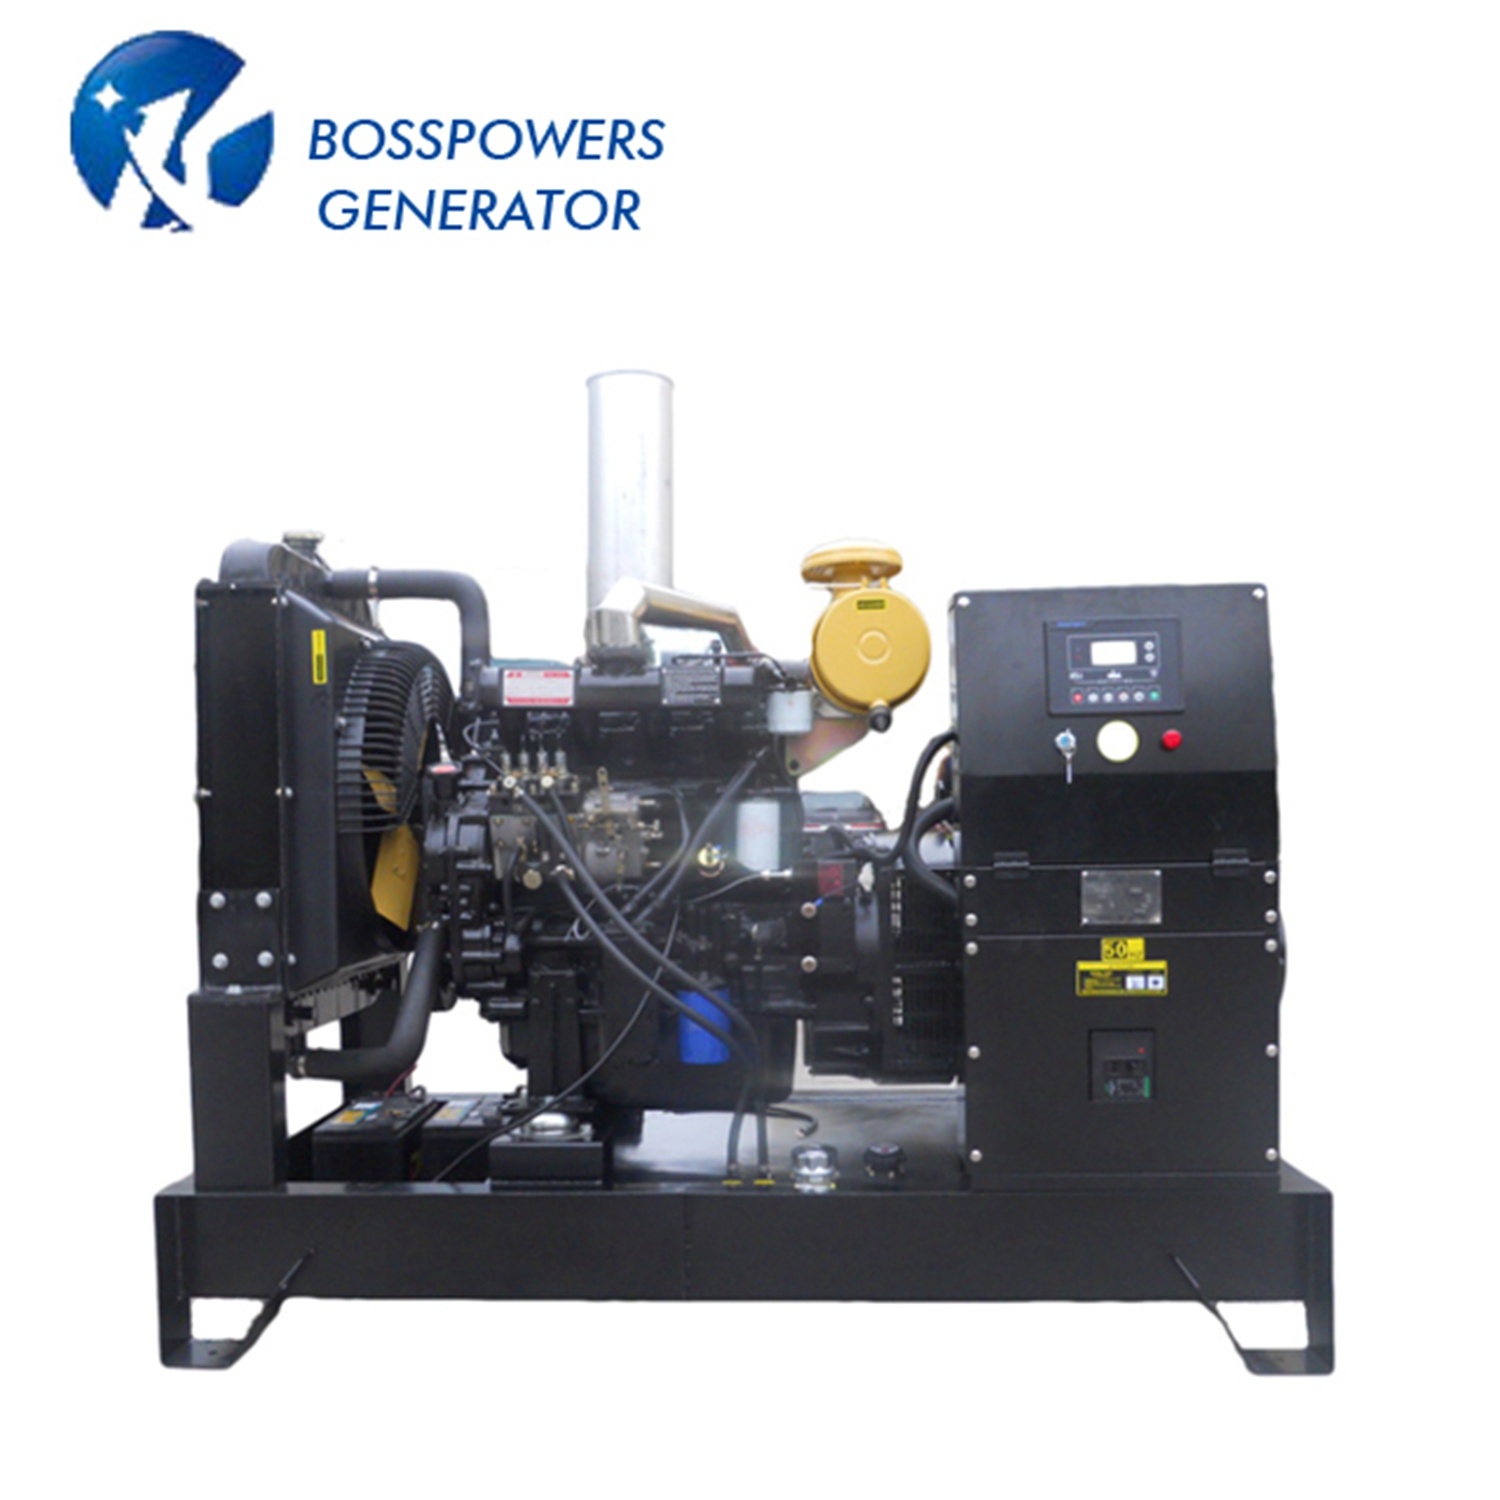 Excellent 160kw 200kVA Yuchai Power Genset Open Generator for Construction Use